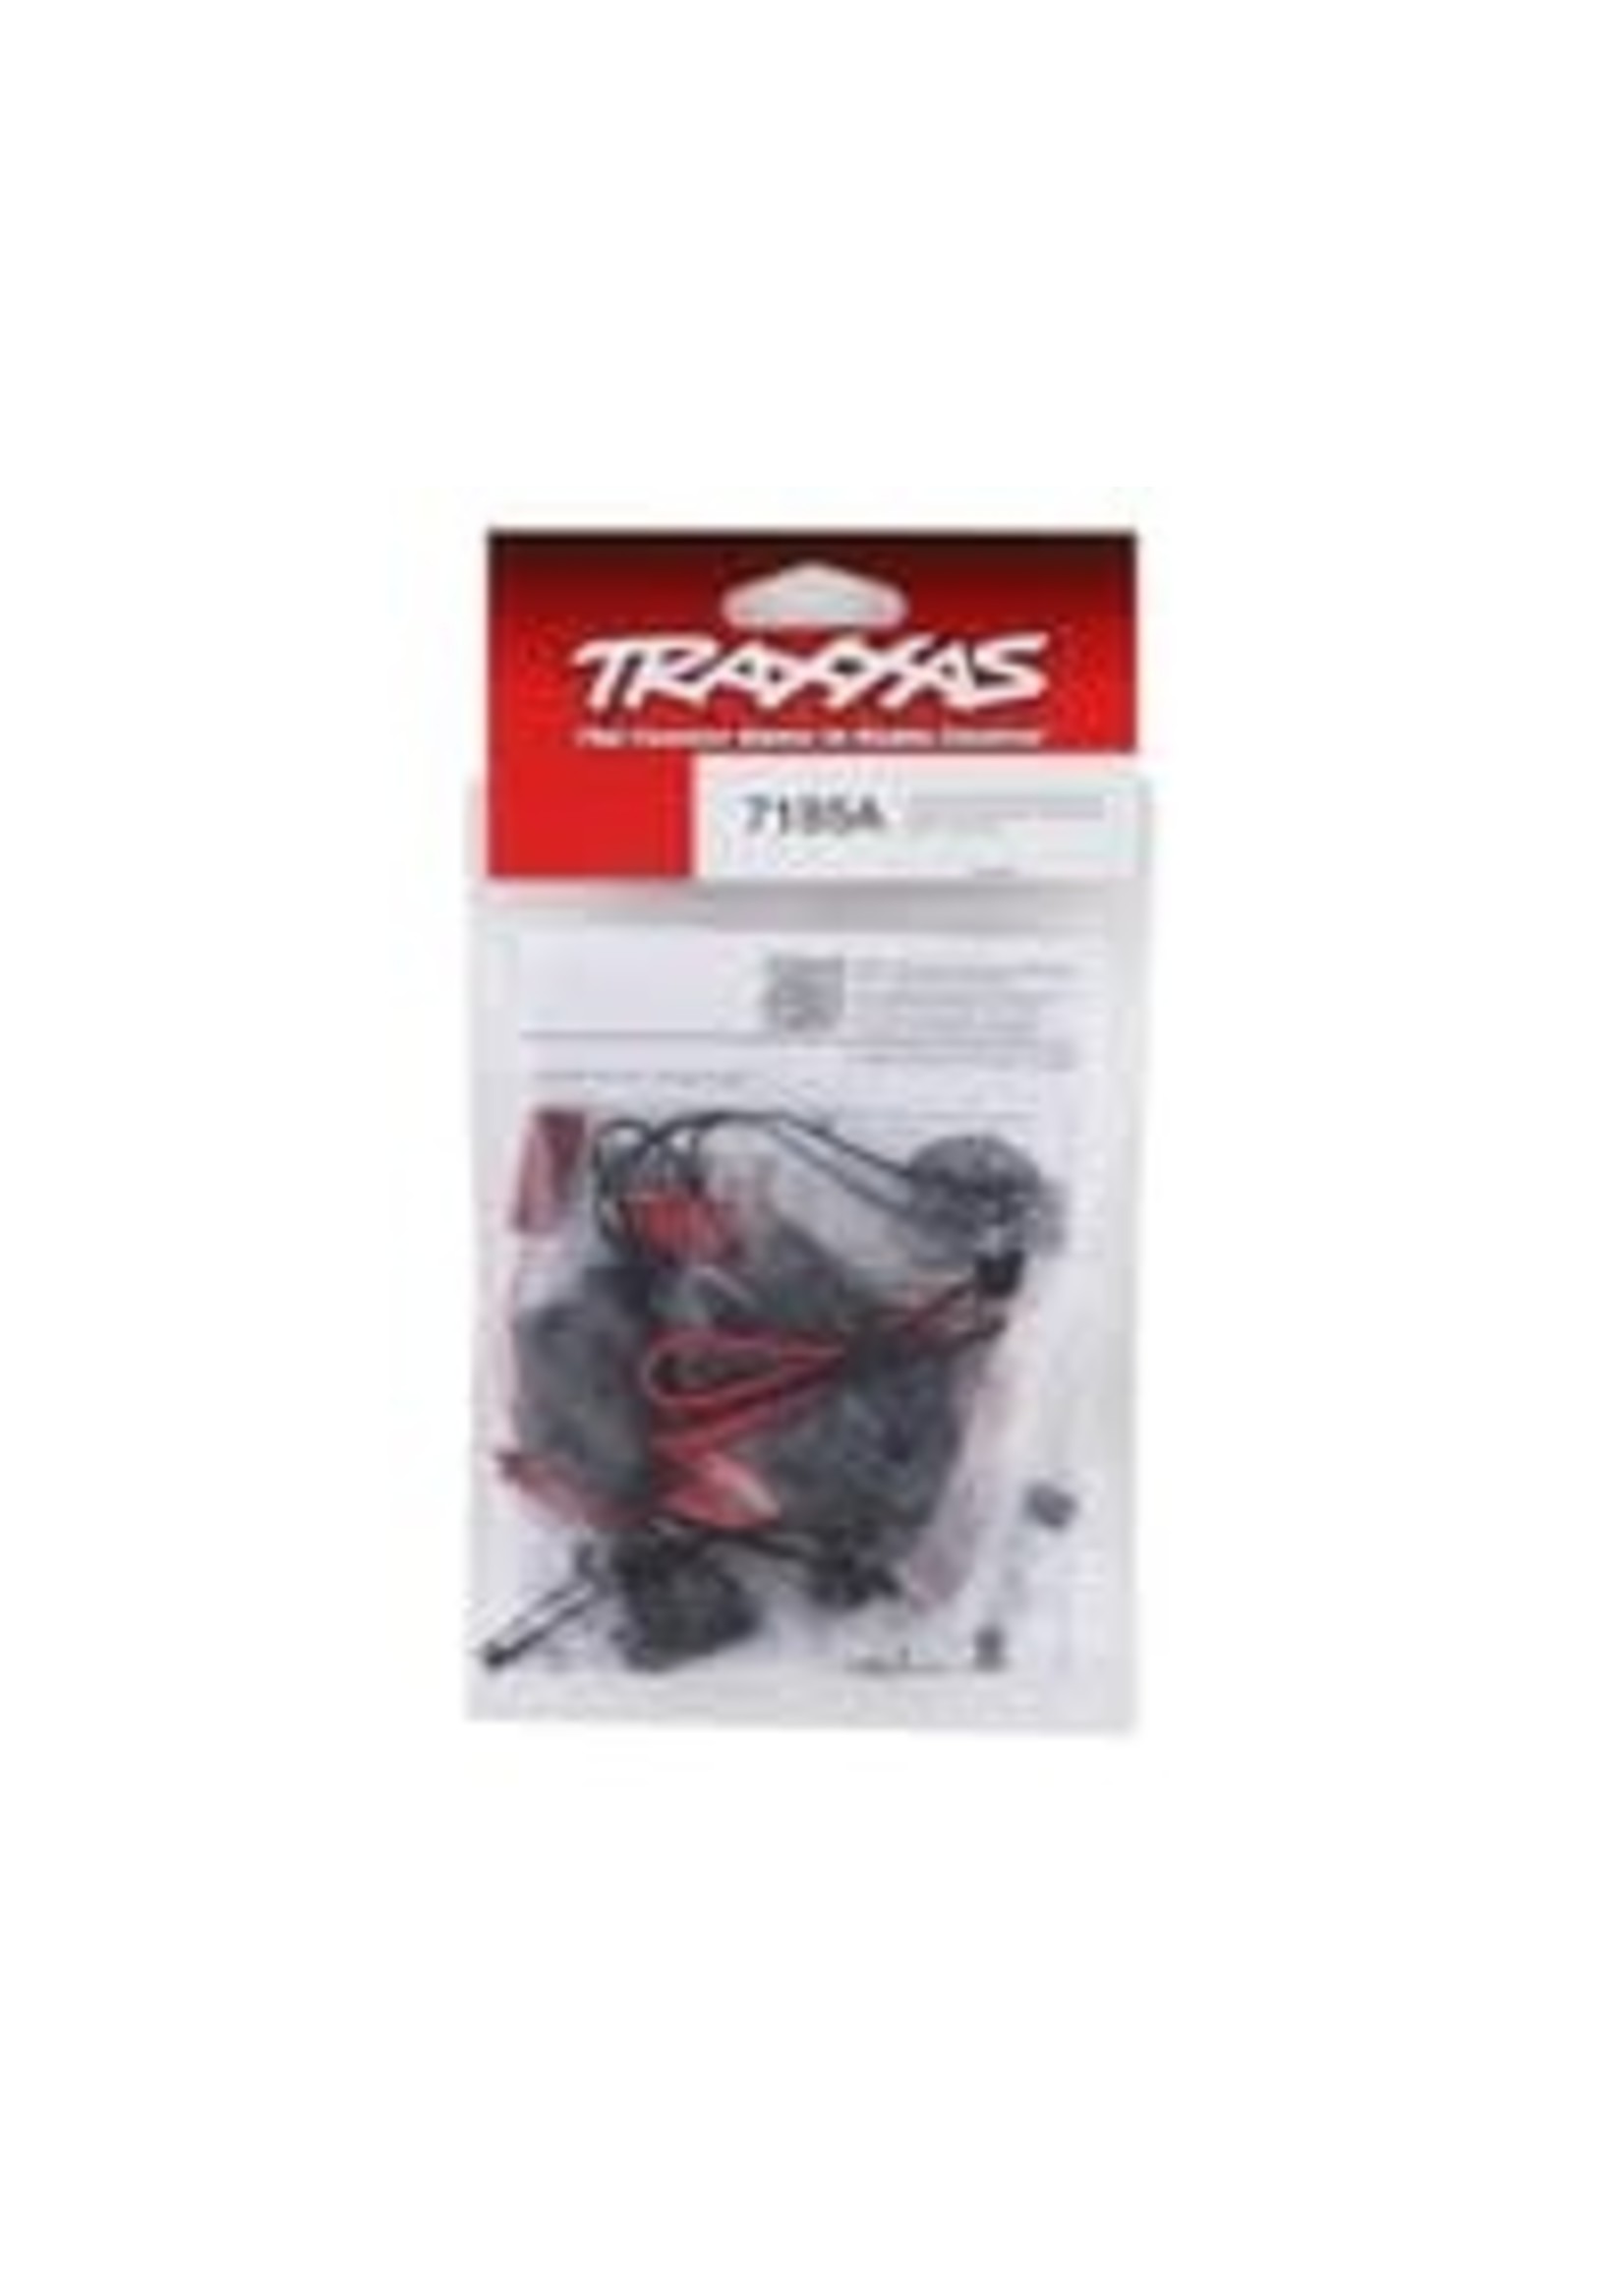 Traxxas 7185A The Traxxas Complete LED Light Kit for the 1/16 scale E-Revo adds four LEDs on the front bumper, and blazes a path through the night. Four red LEDs in the rear bumper let you track progress from behind. A tightly regulated power supply prevents flic